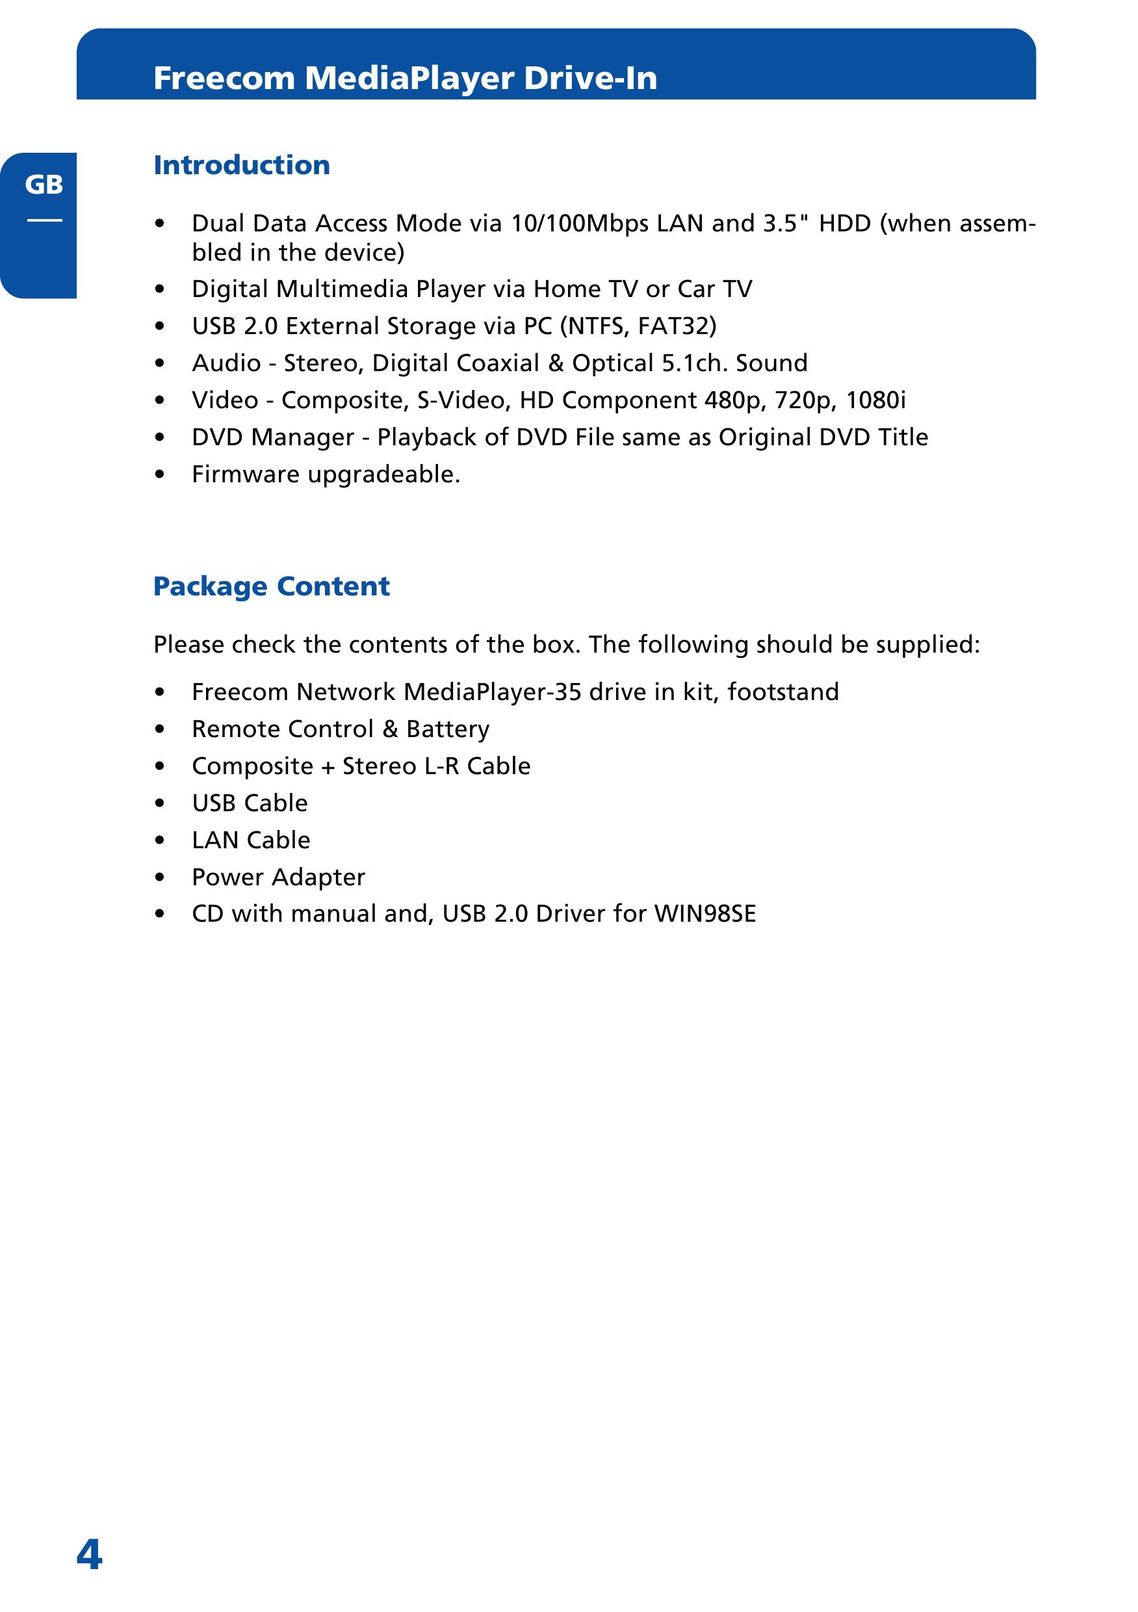 Freecom Technologies MediaPlayer Drive-In Kit Portable Multimedia Player User Manual (Page 4)